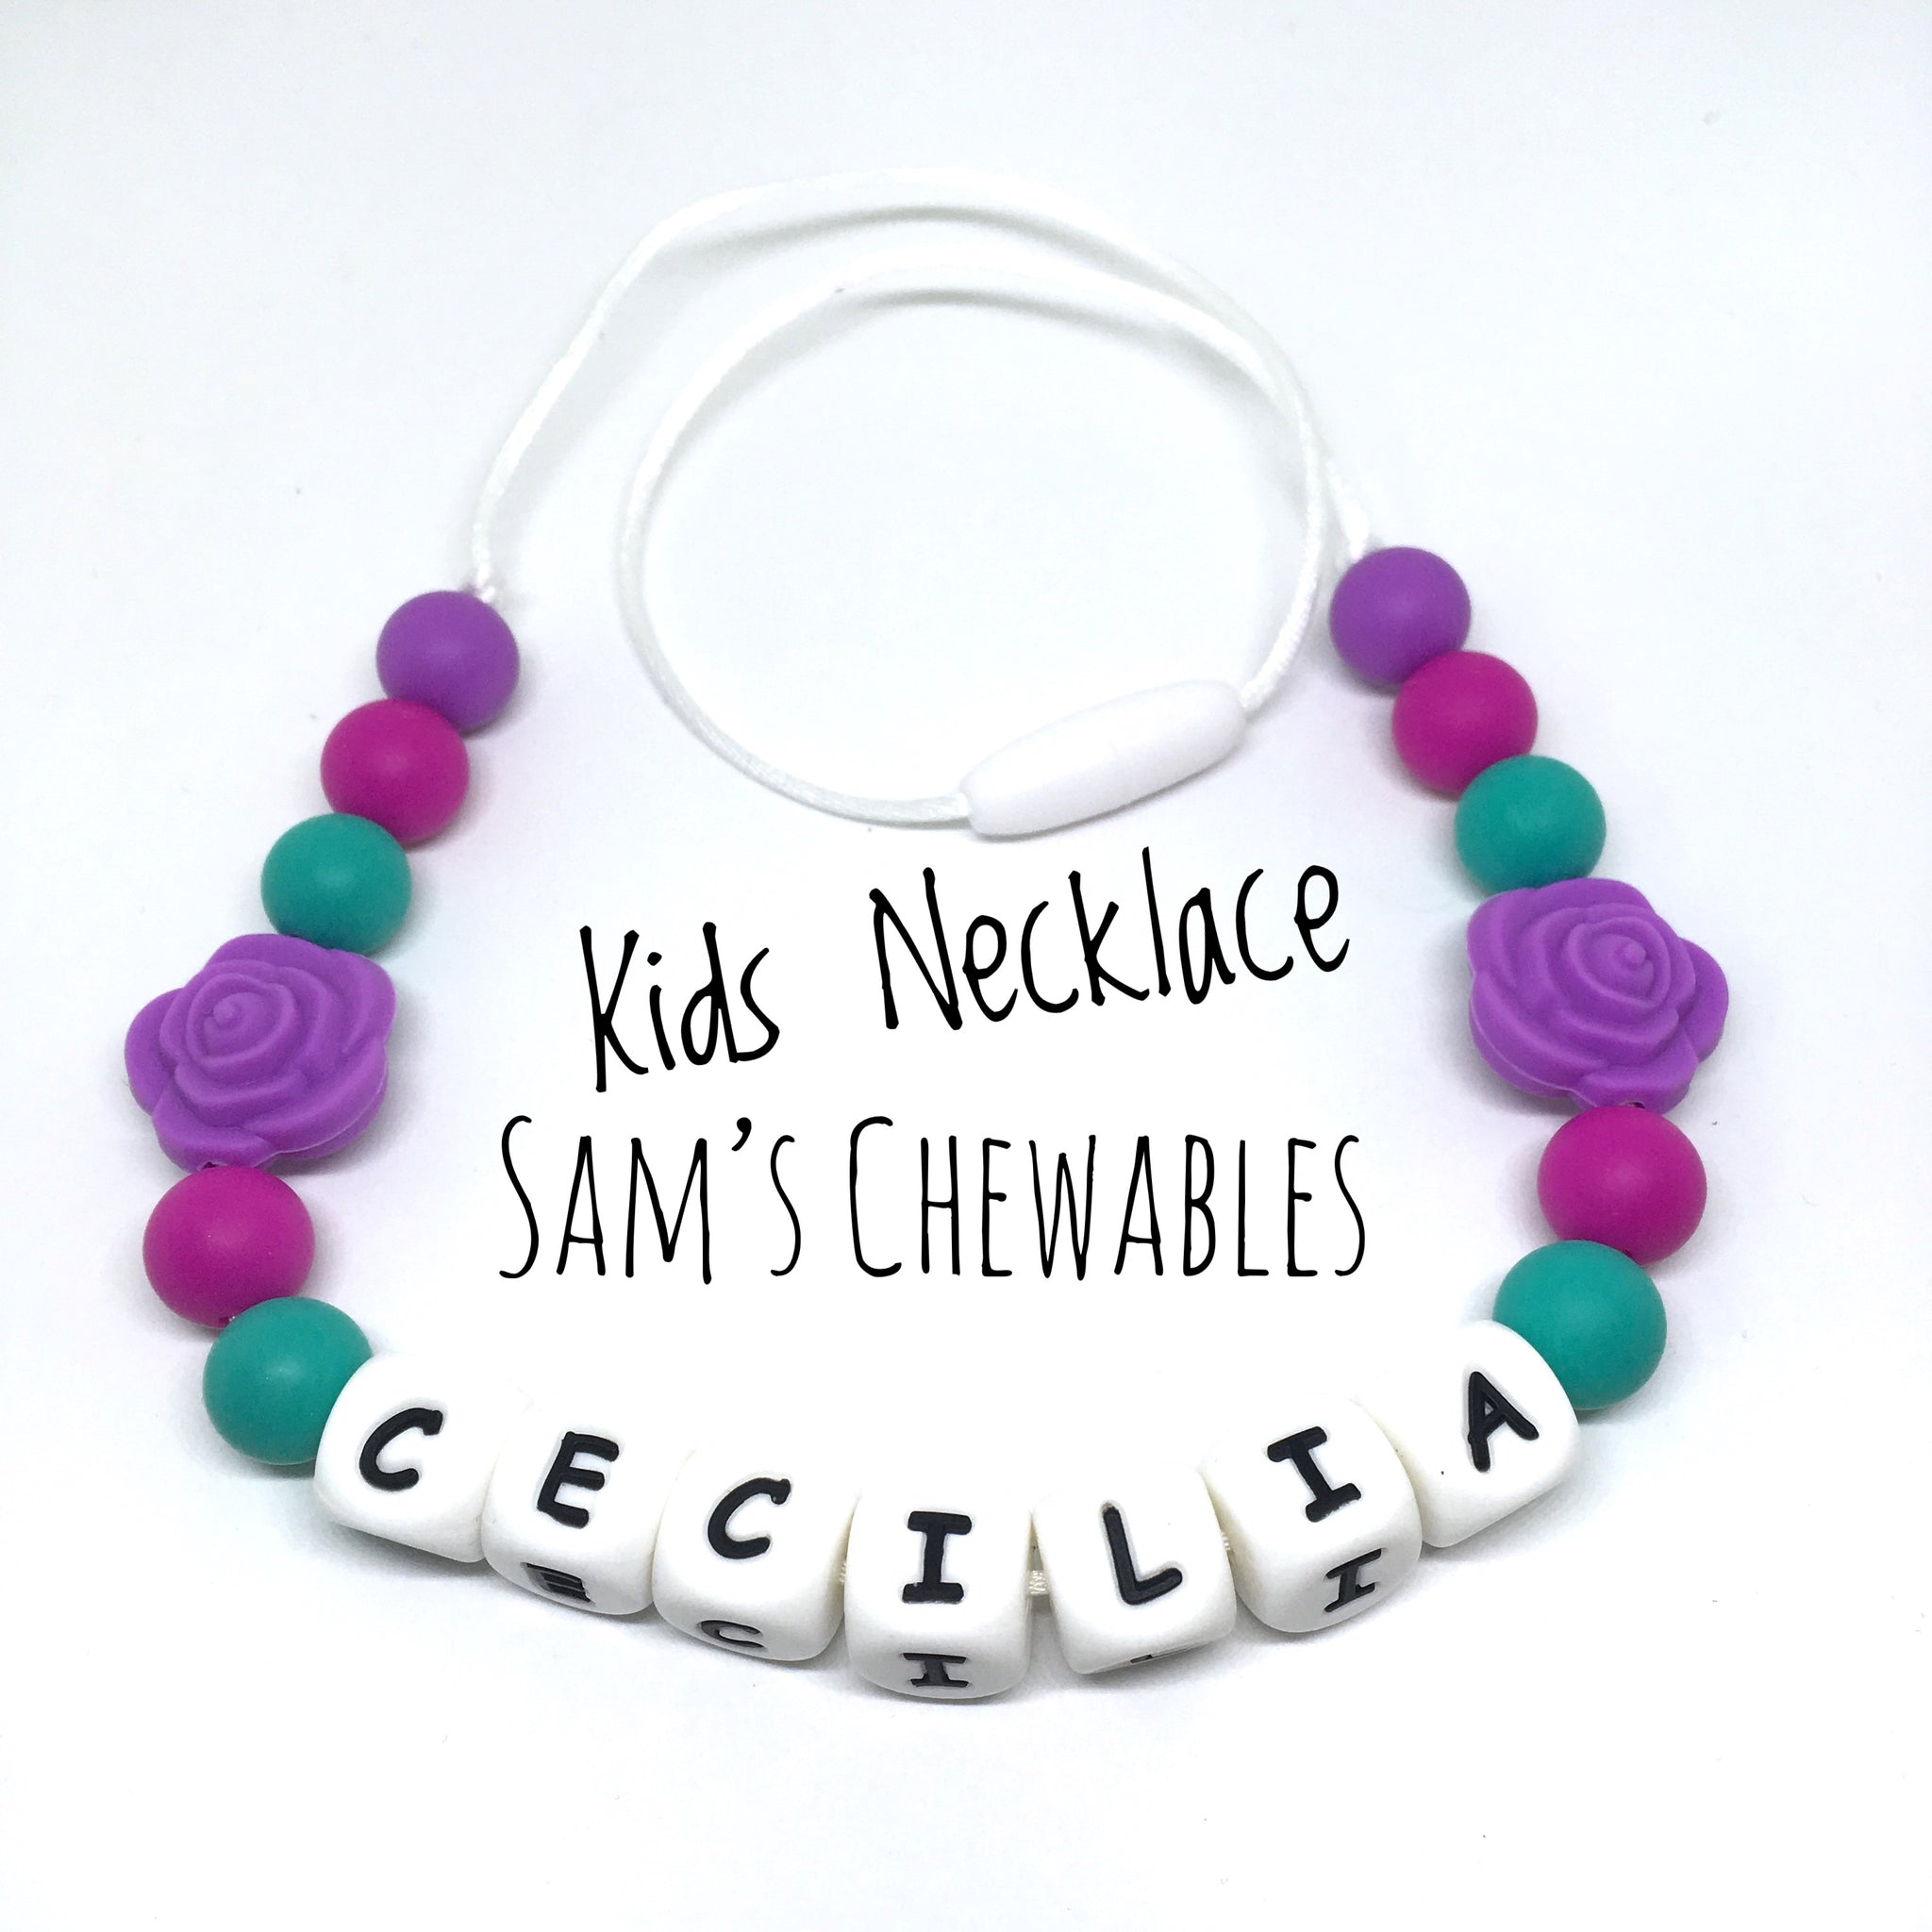 Alphabet Bead Necklace Craft for Kids | Necklace craft, Diy jewelry gifts, Alphabet  beads